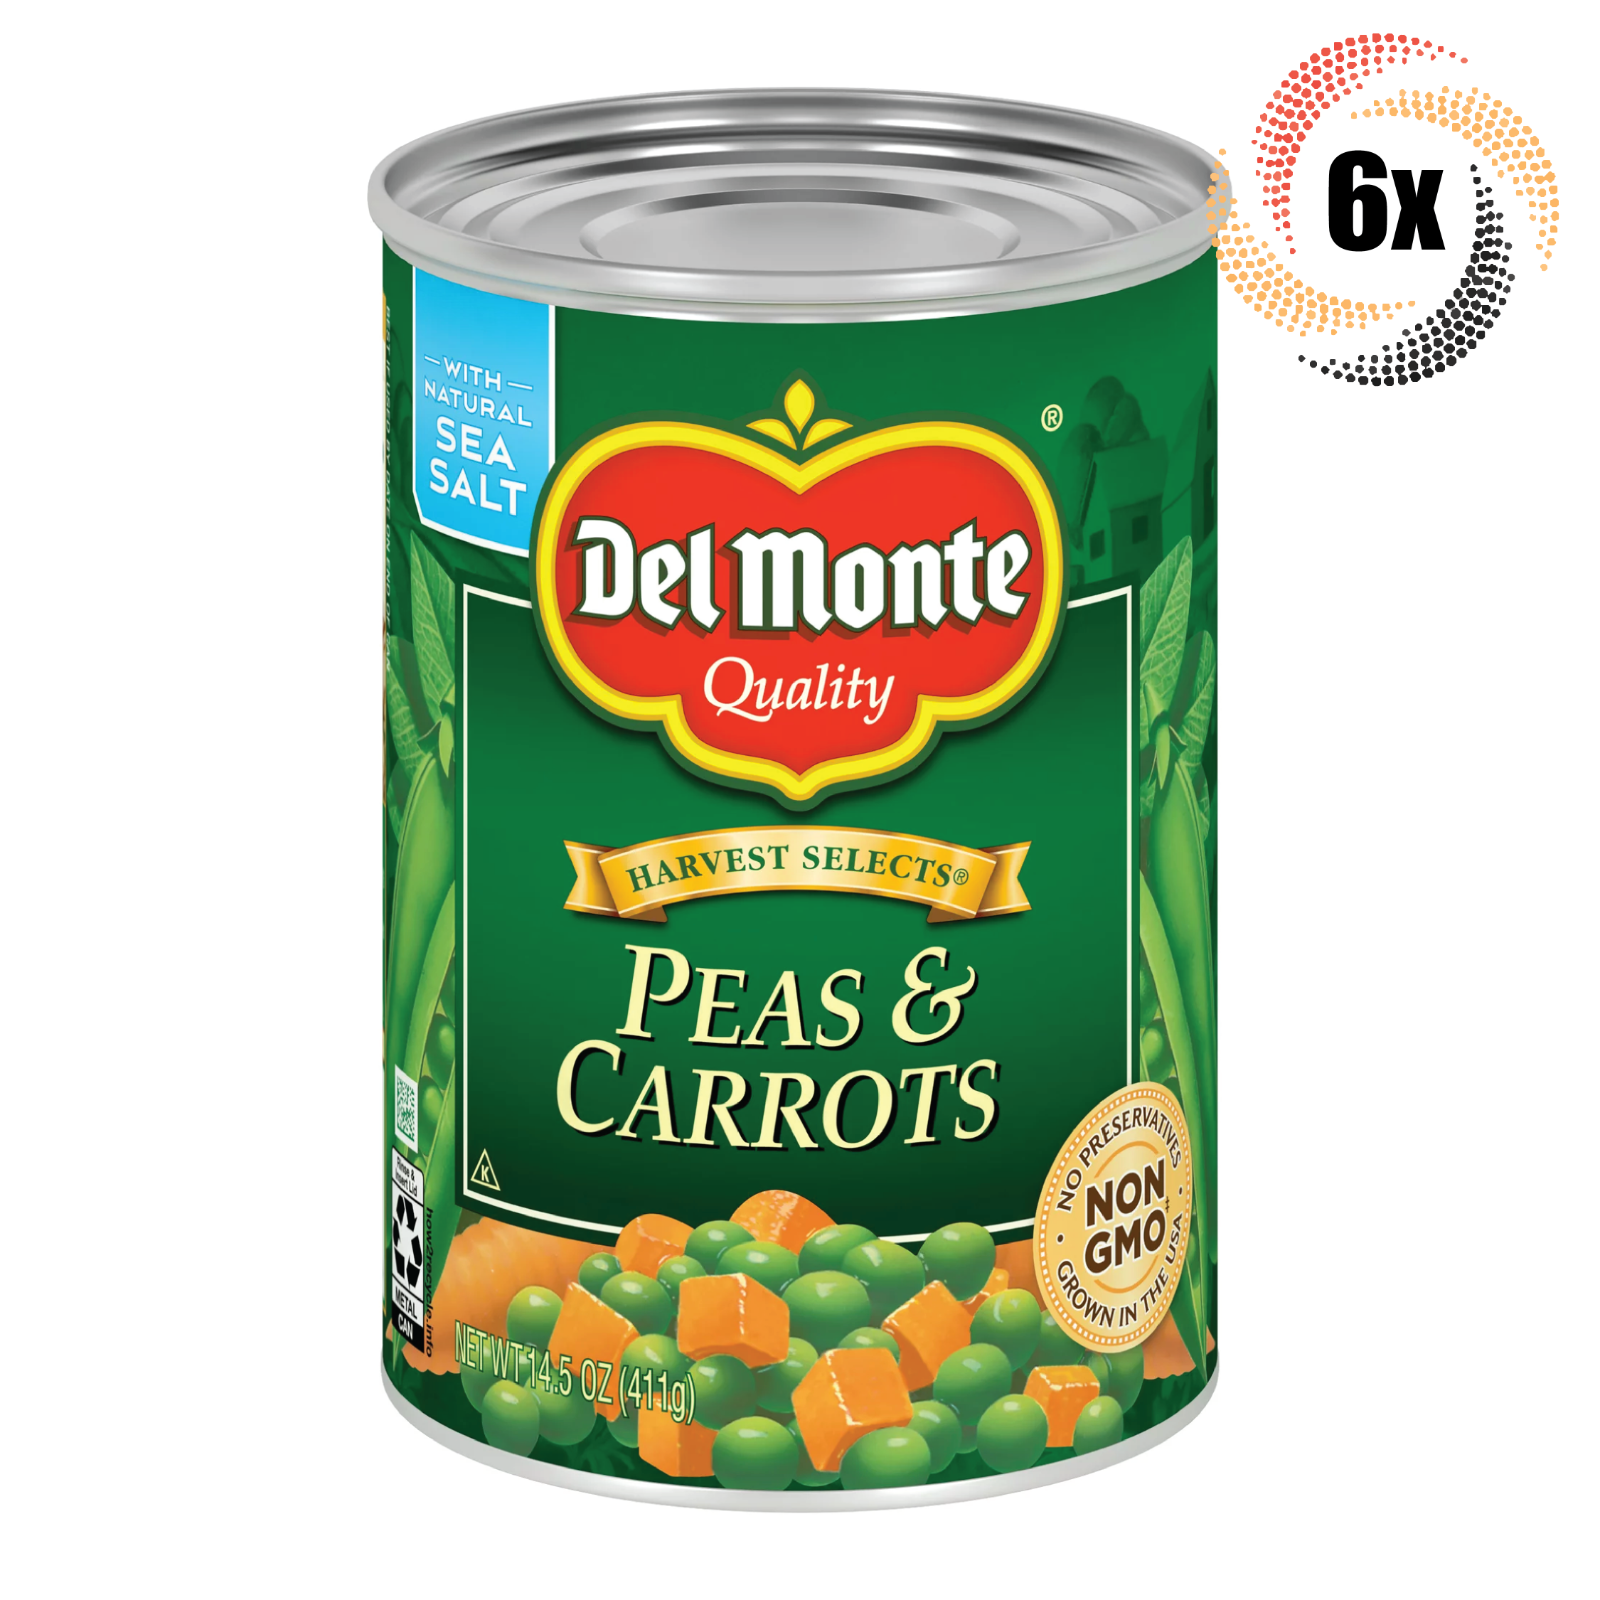 Primary image for 6x Cans Del Monte Peas & Carrots With Natural Sea Salt | 14.5oz | Fast Shipping!